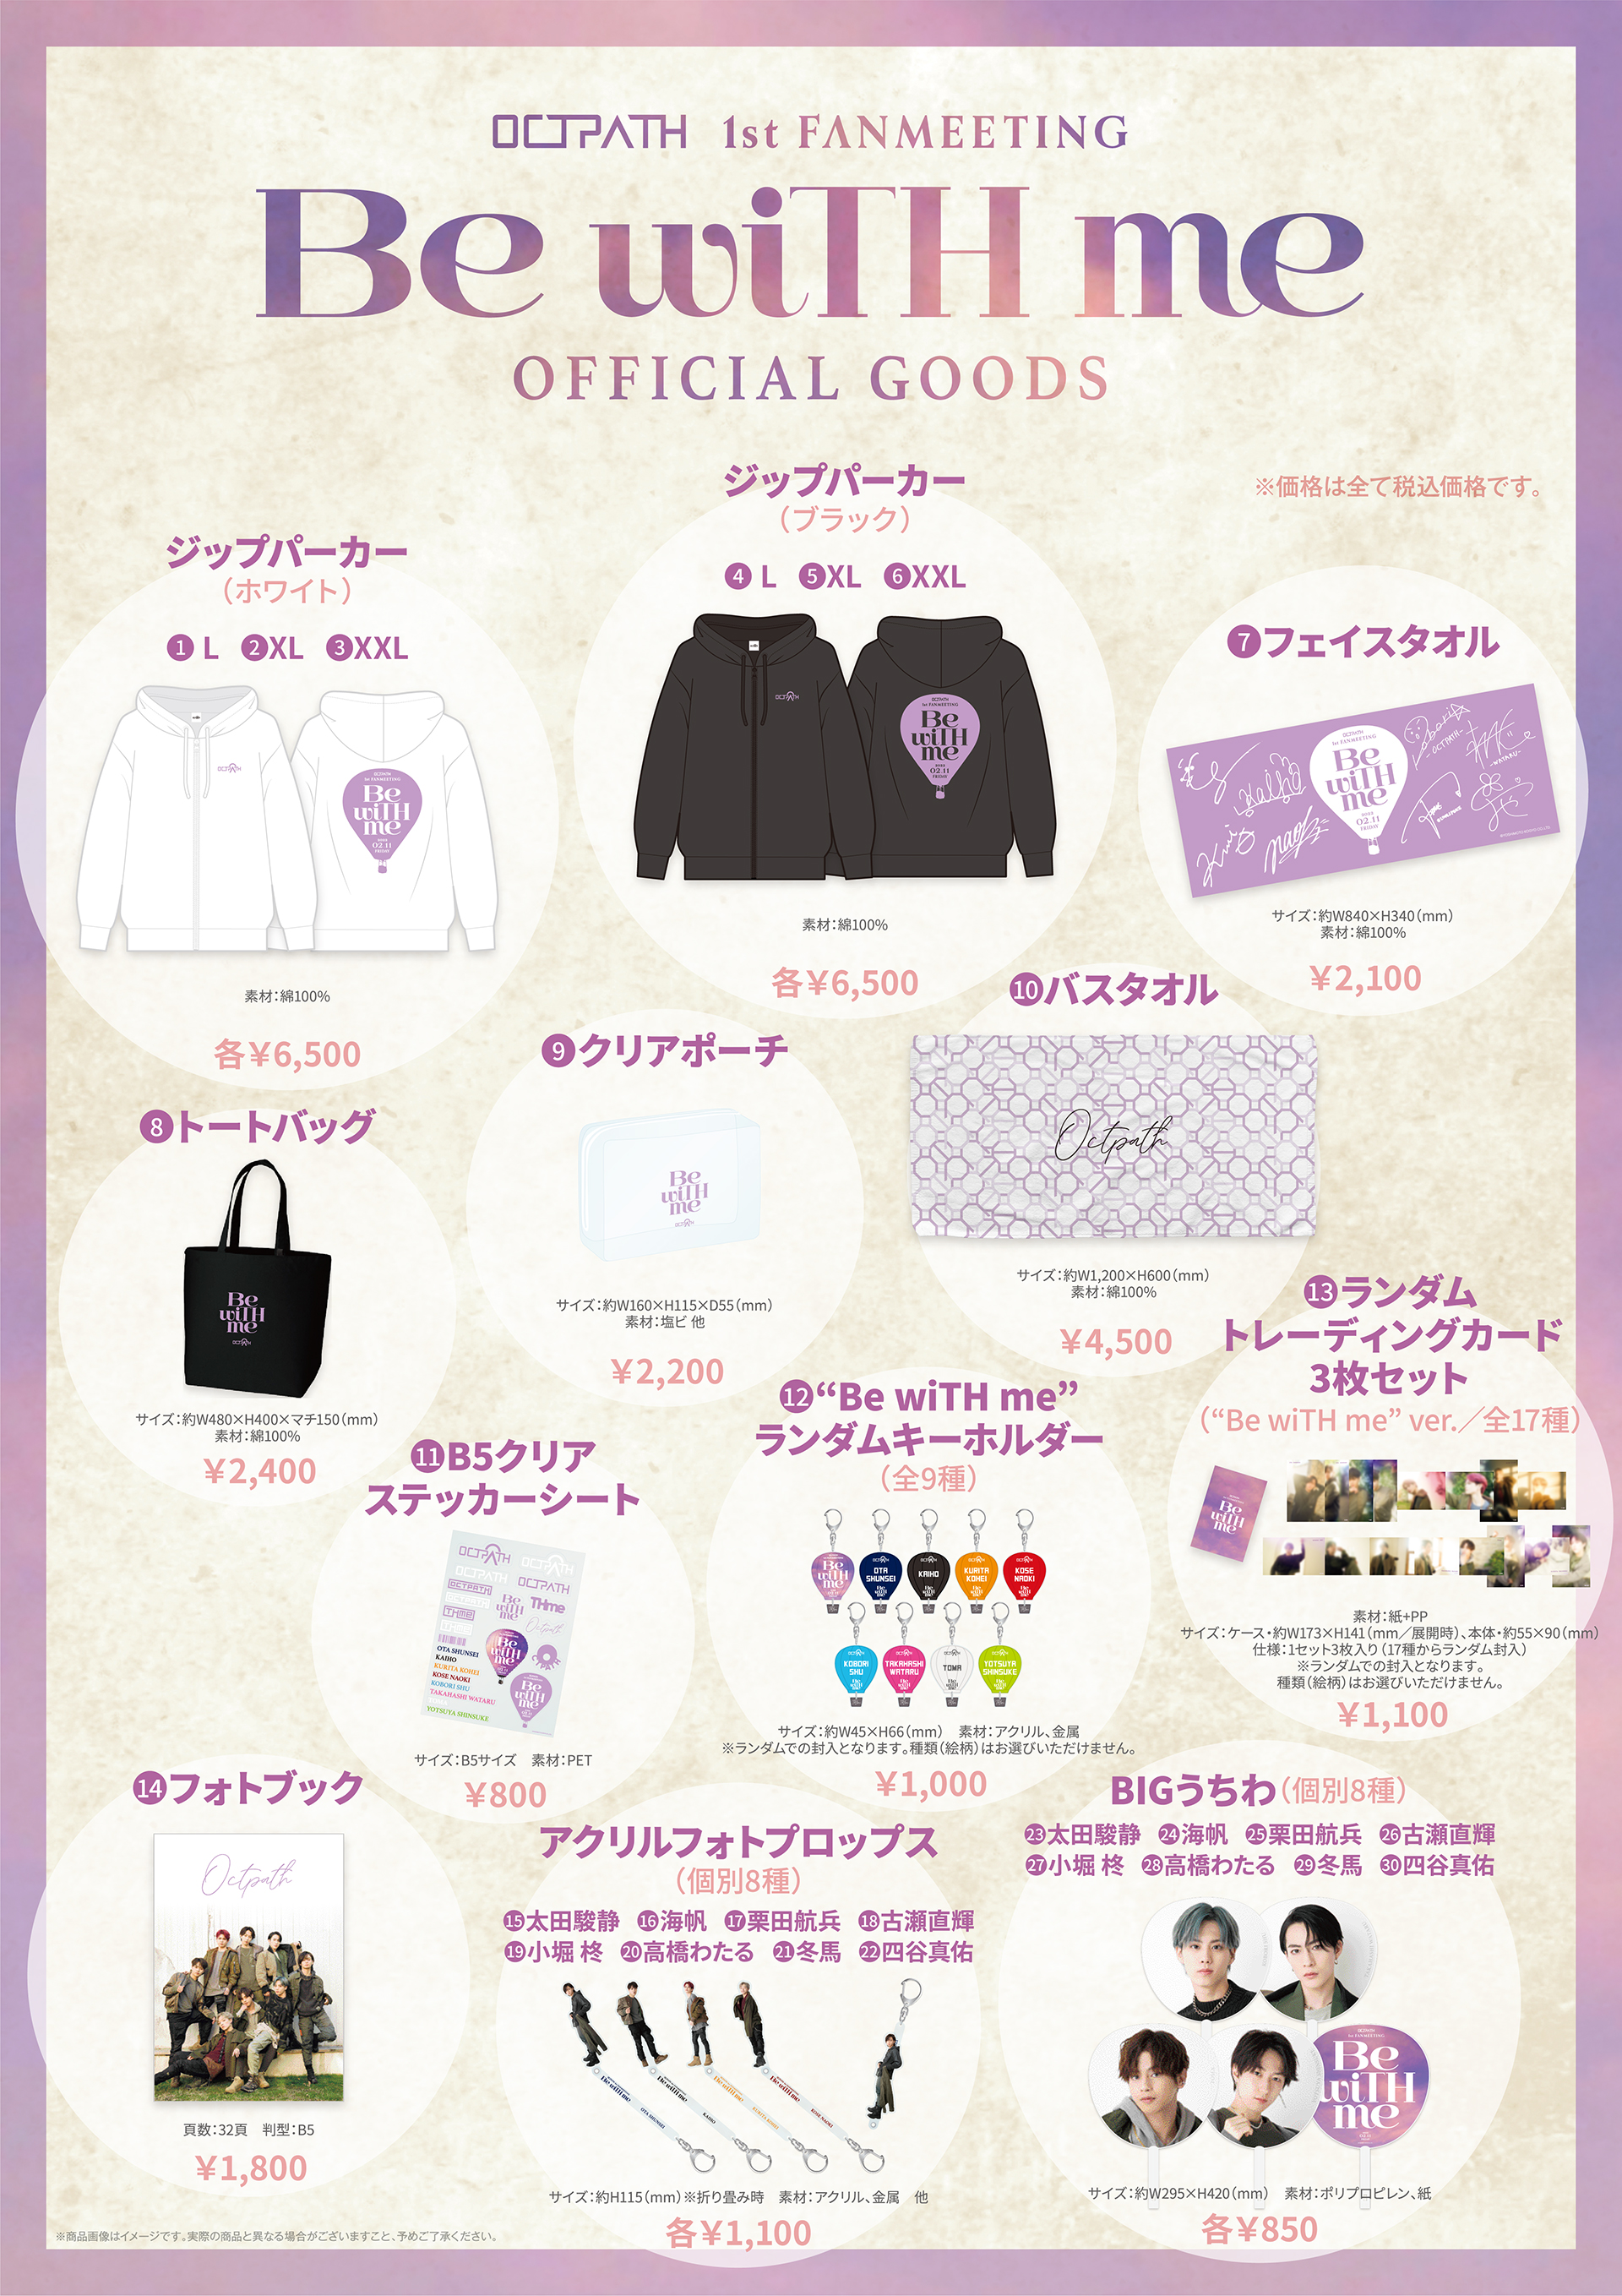 OFFICIAL GOODS】「OCTPATH 1st FANMEETING Be wiTH me」 GOODS 会場 ...